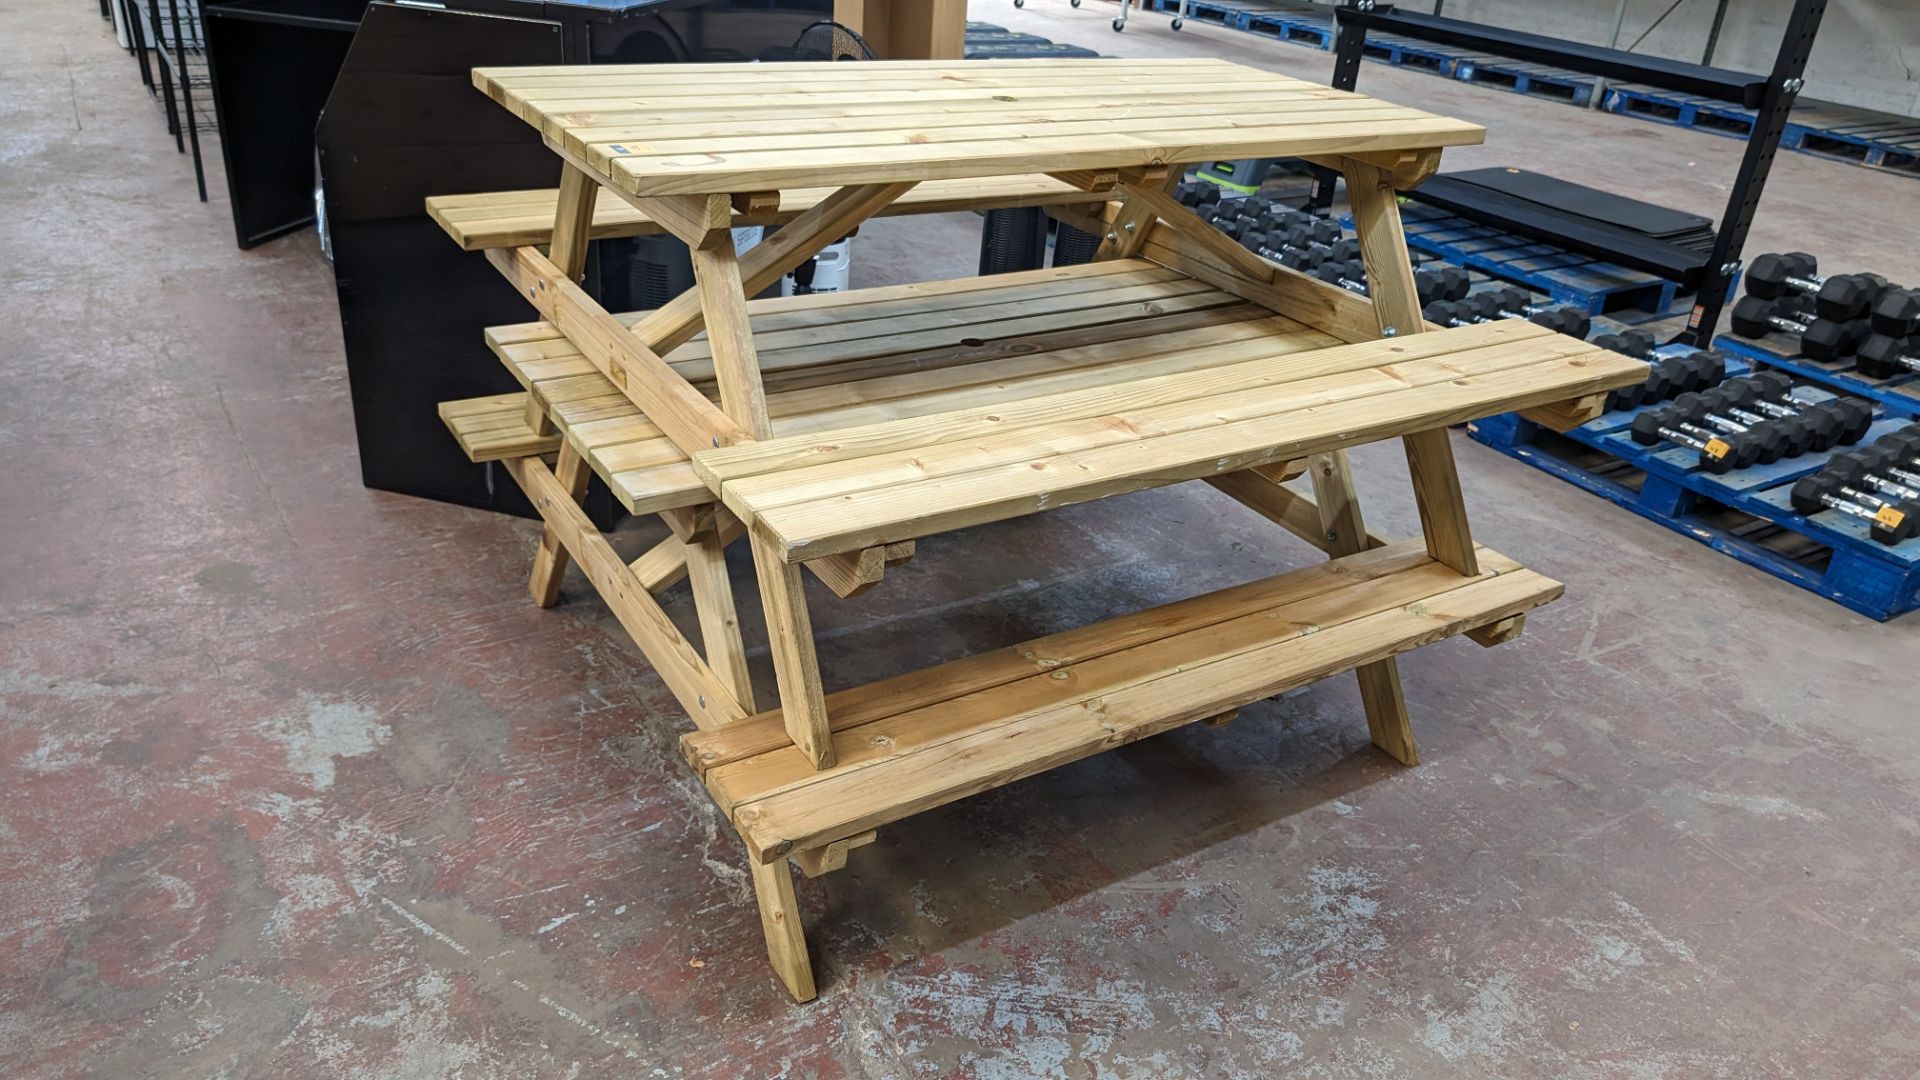 2 off Rowlinson wooden picnic benches, each with max dimensions including the seating sections of ap